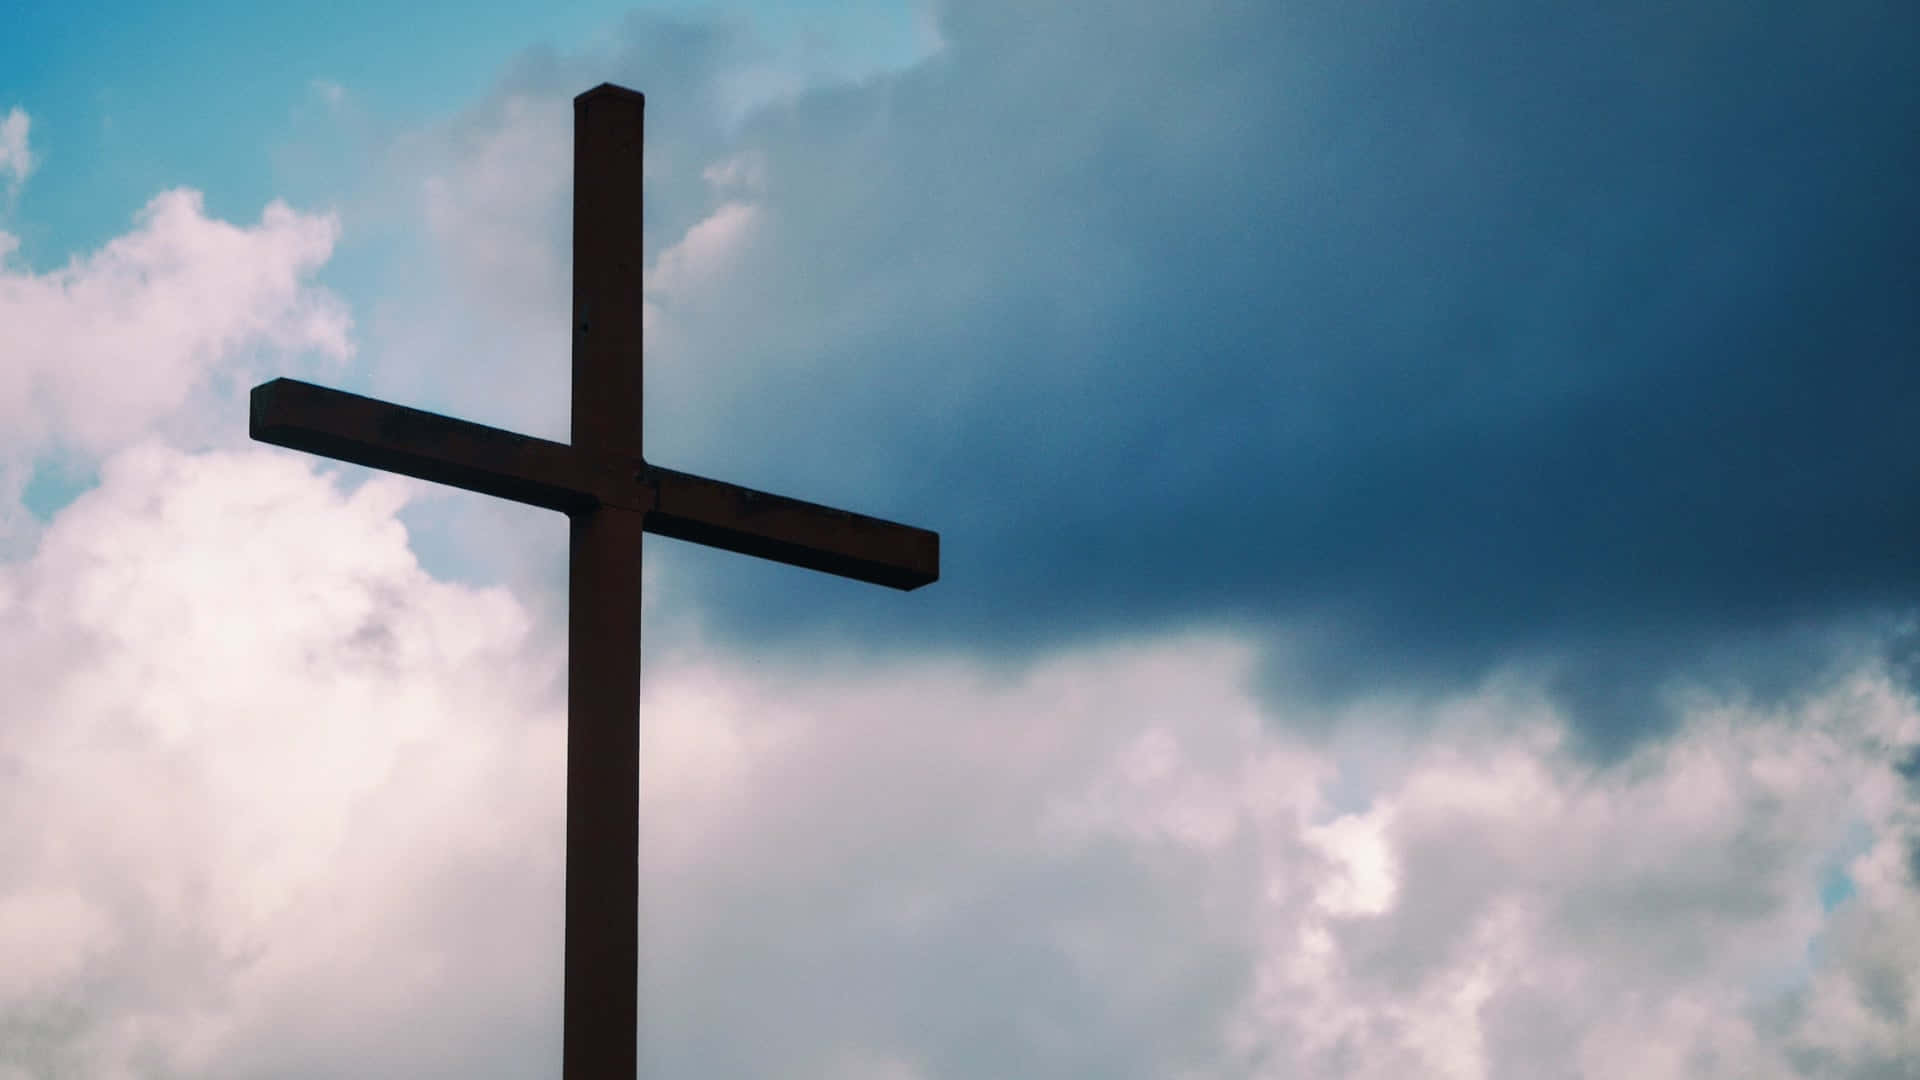 A Cross Is Shown Against A Cloudy Sky